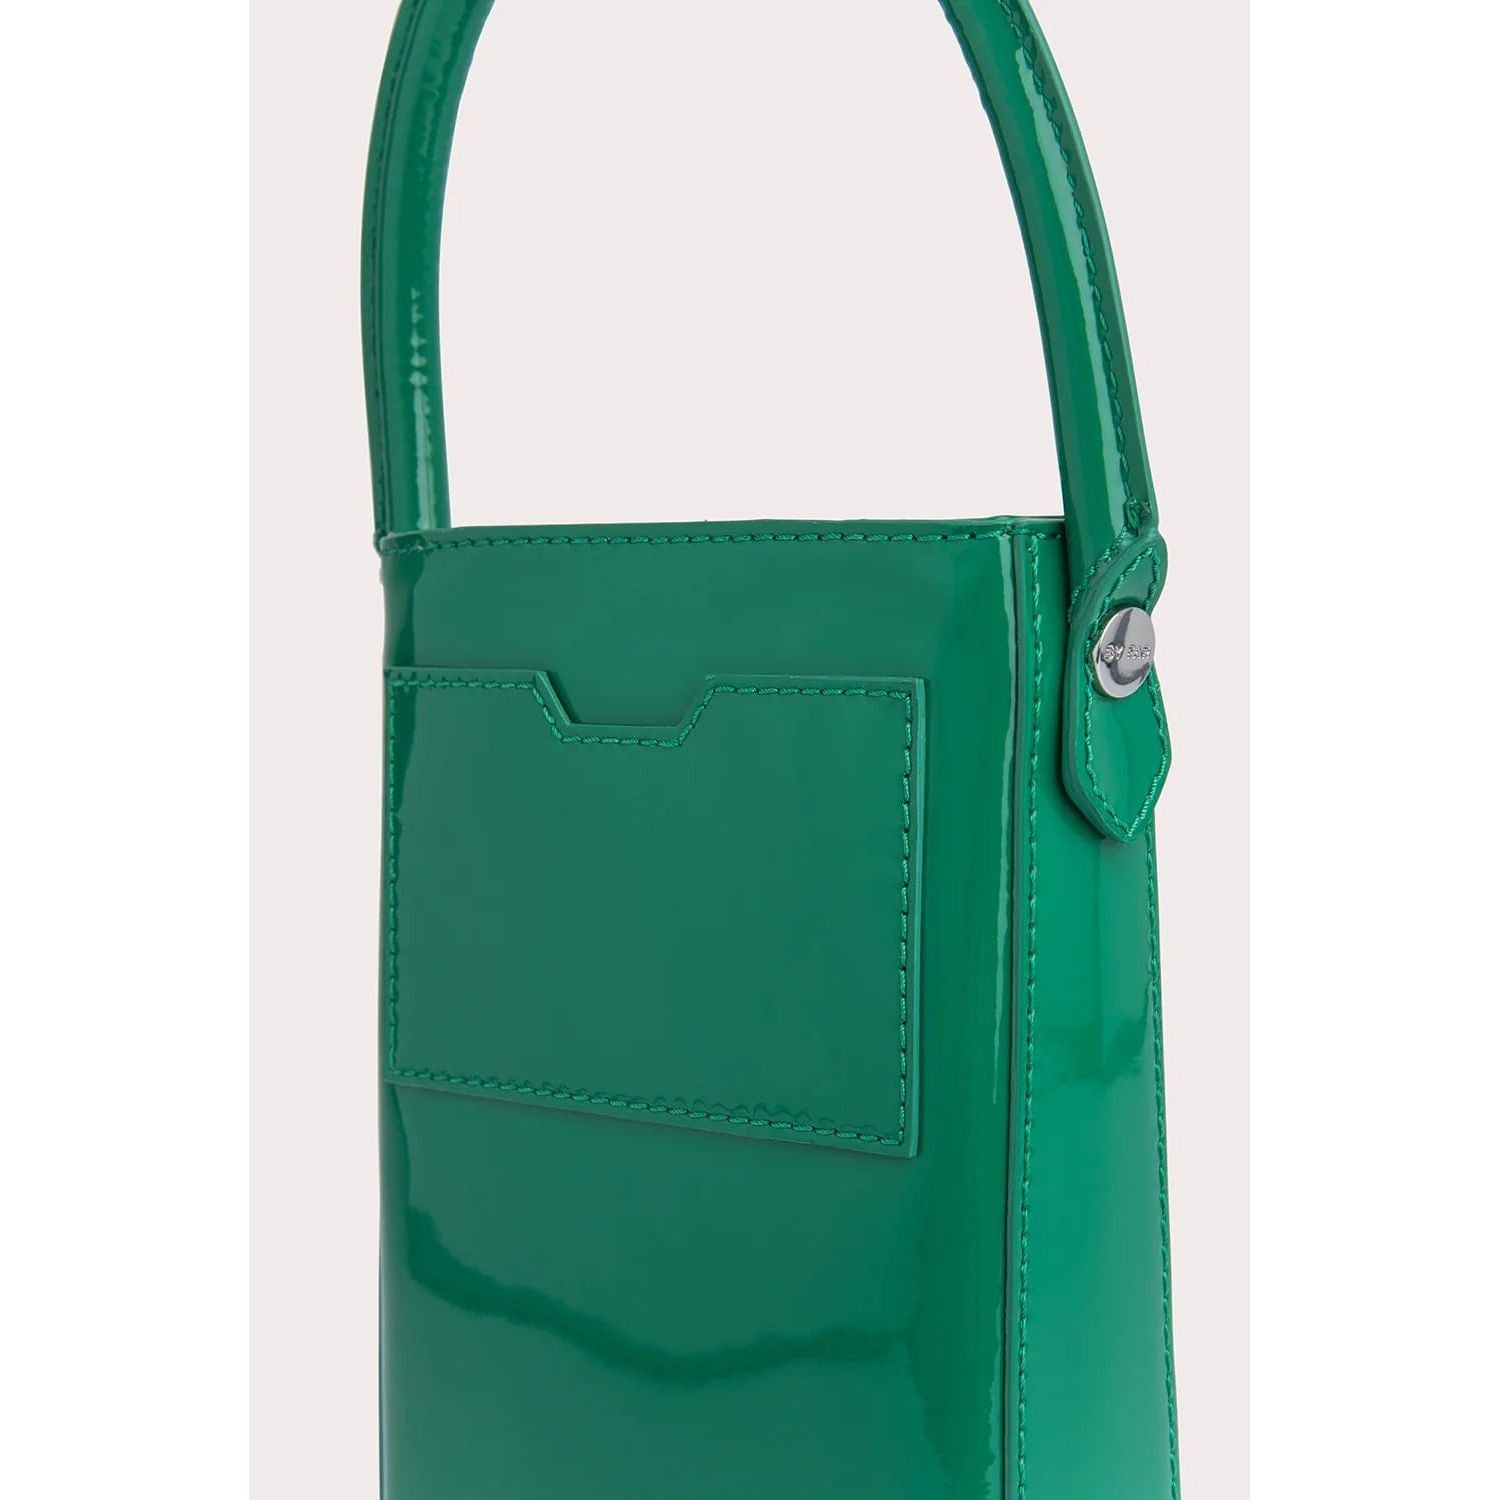 BY FAR NOTE CLOVER GREEN PATENT LEATHER - Yooto